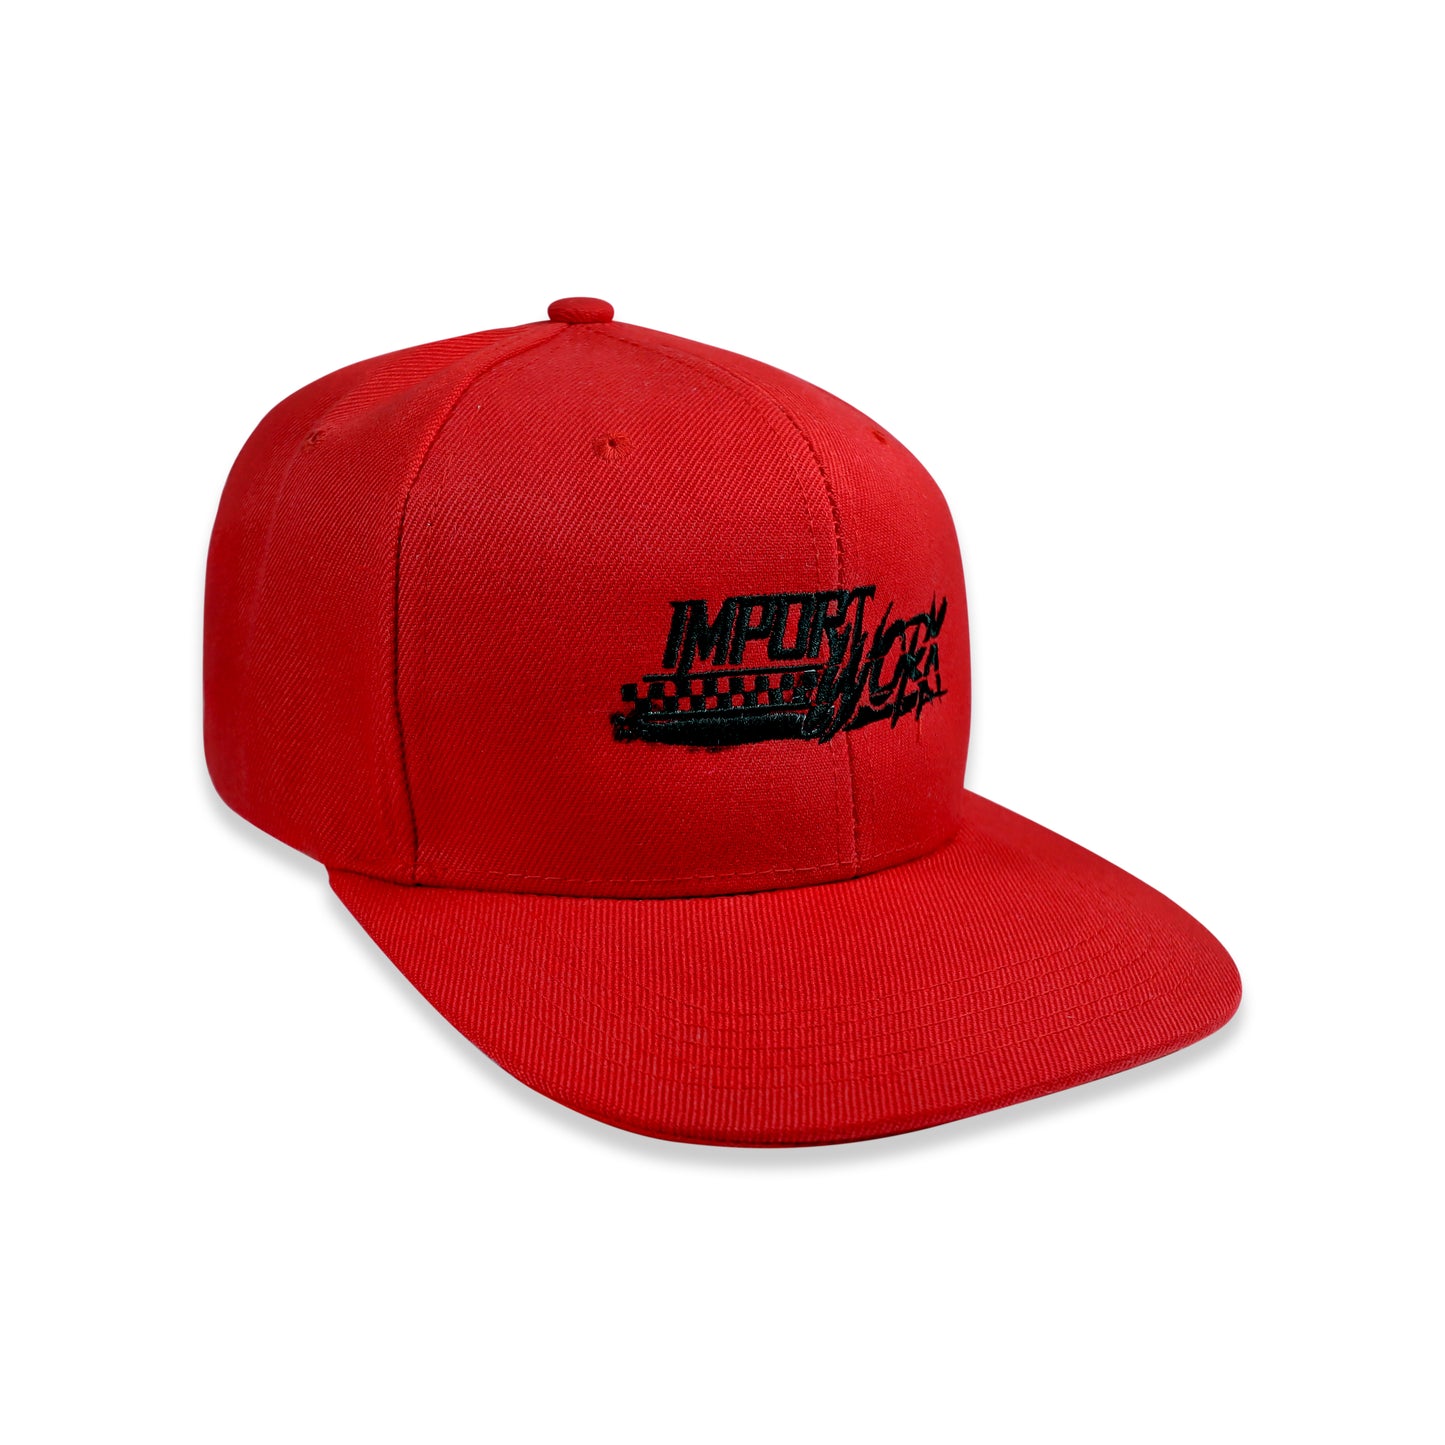 ImportWorx Red Checkered Embroidered Snapback Hat